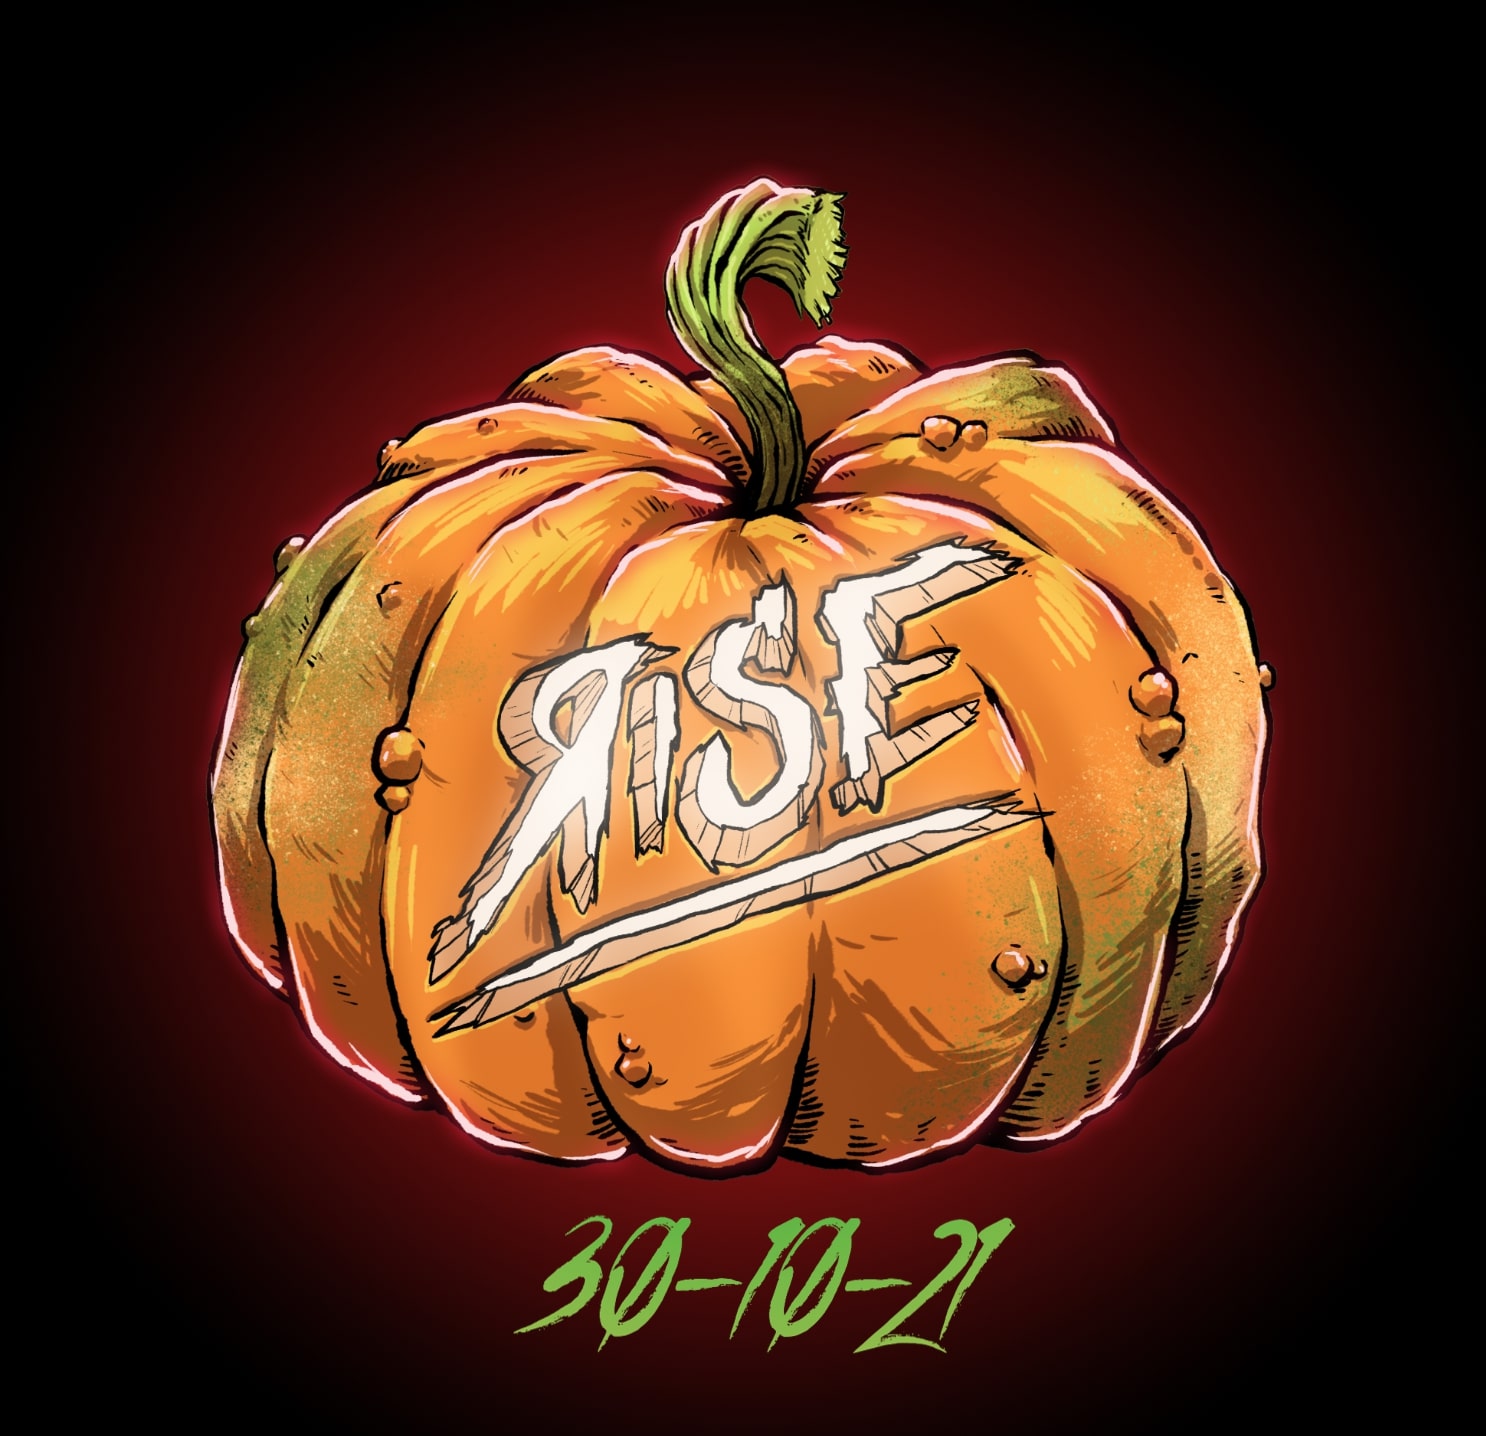 Rise All Hallows Eve At Greys Club Newcastle Upon Tyne On 30th Oct 2021 Fatsoma